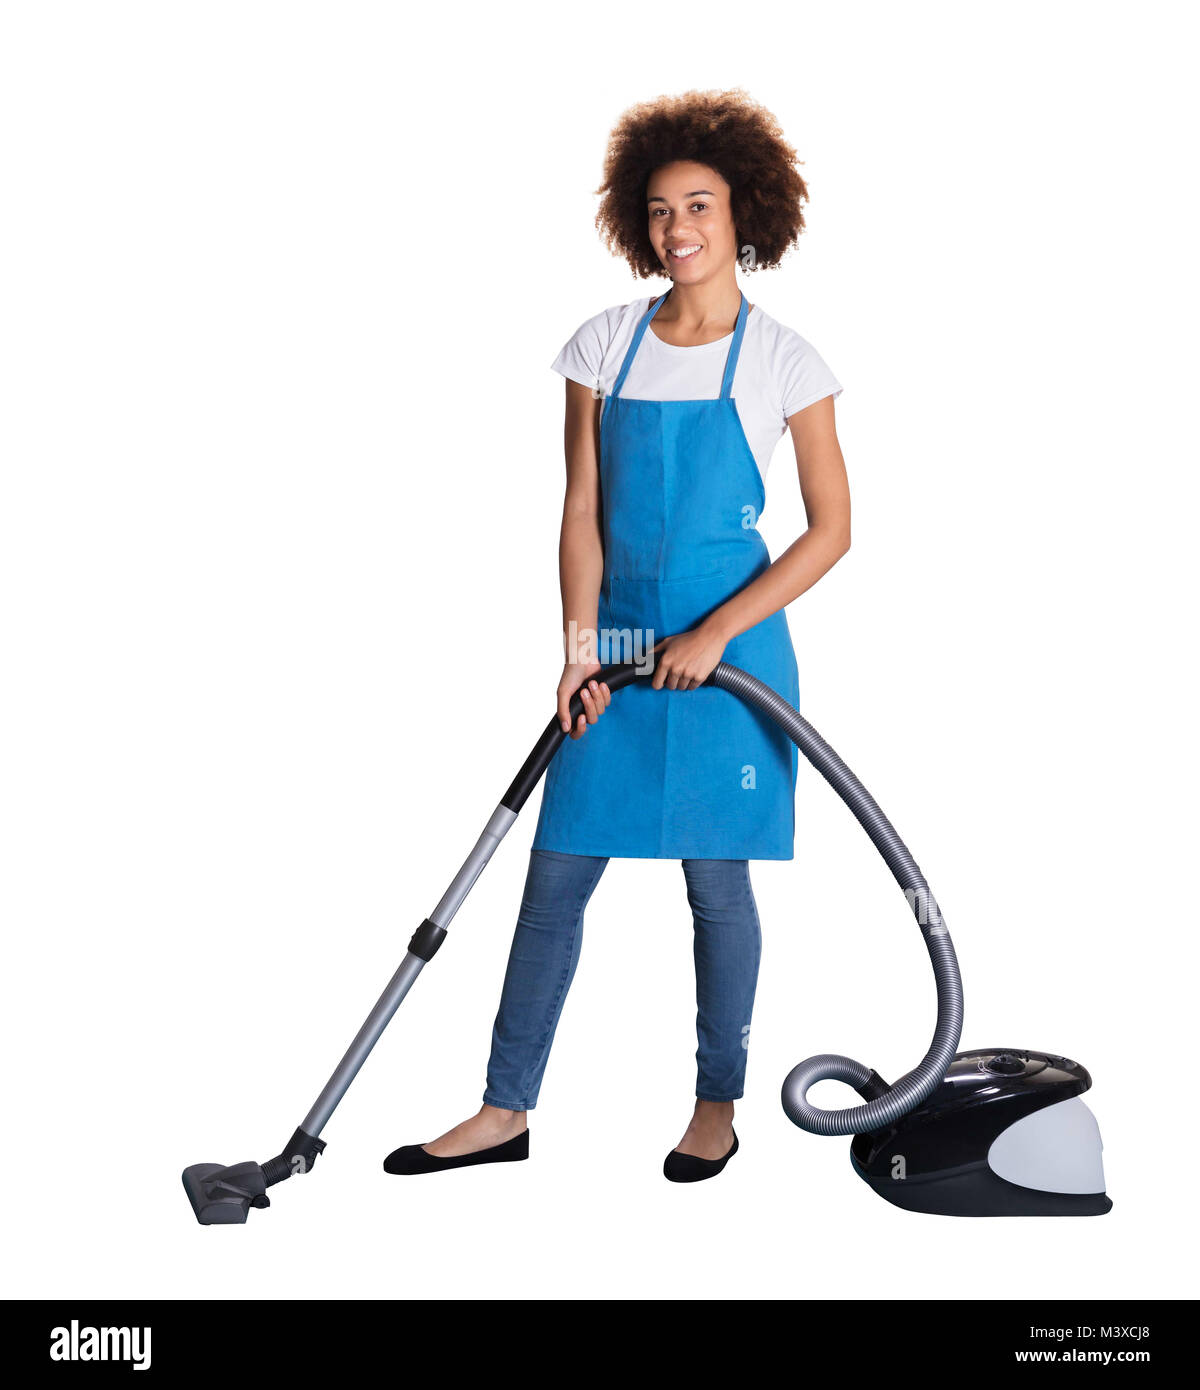 Portrait Of A Happy Female Janitor With Vacuum Cleaner On White Background Stock Photo